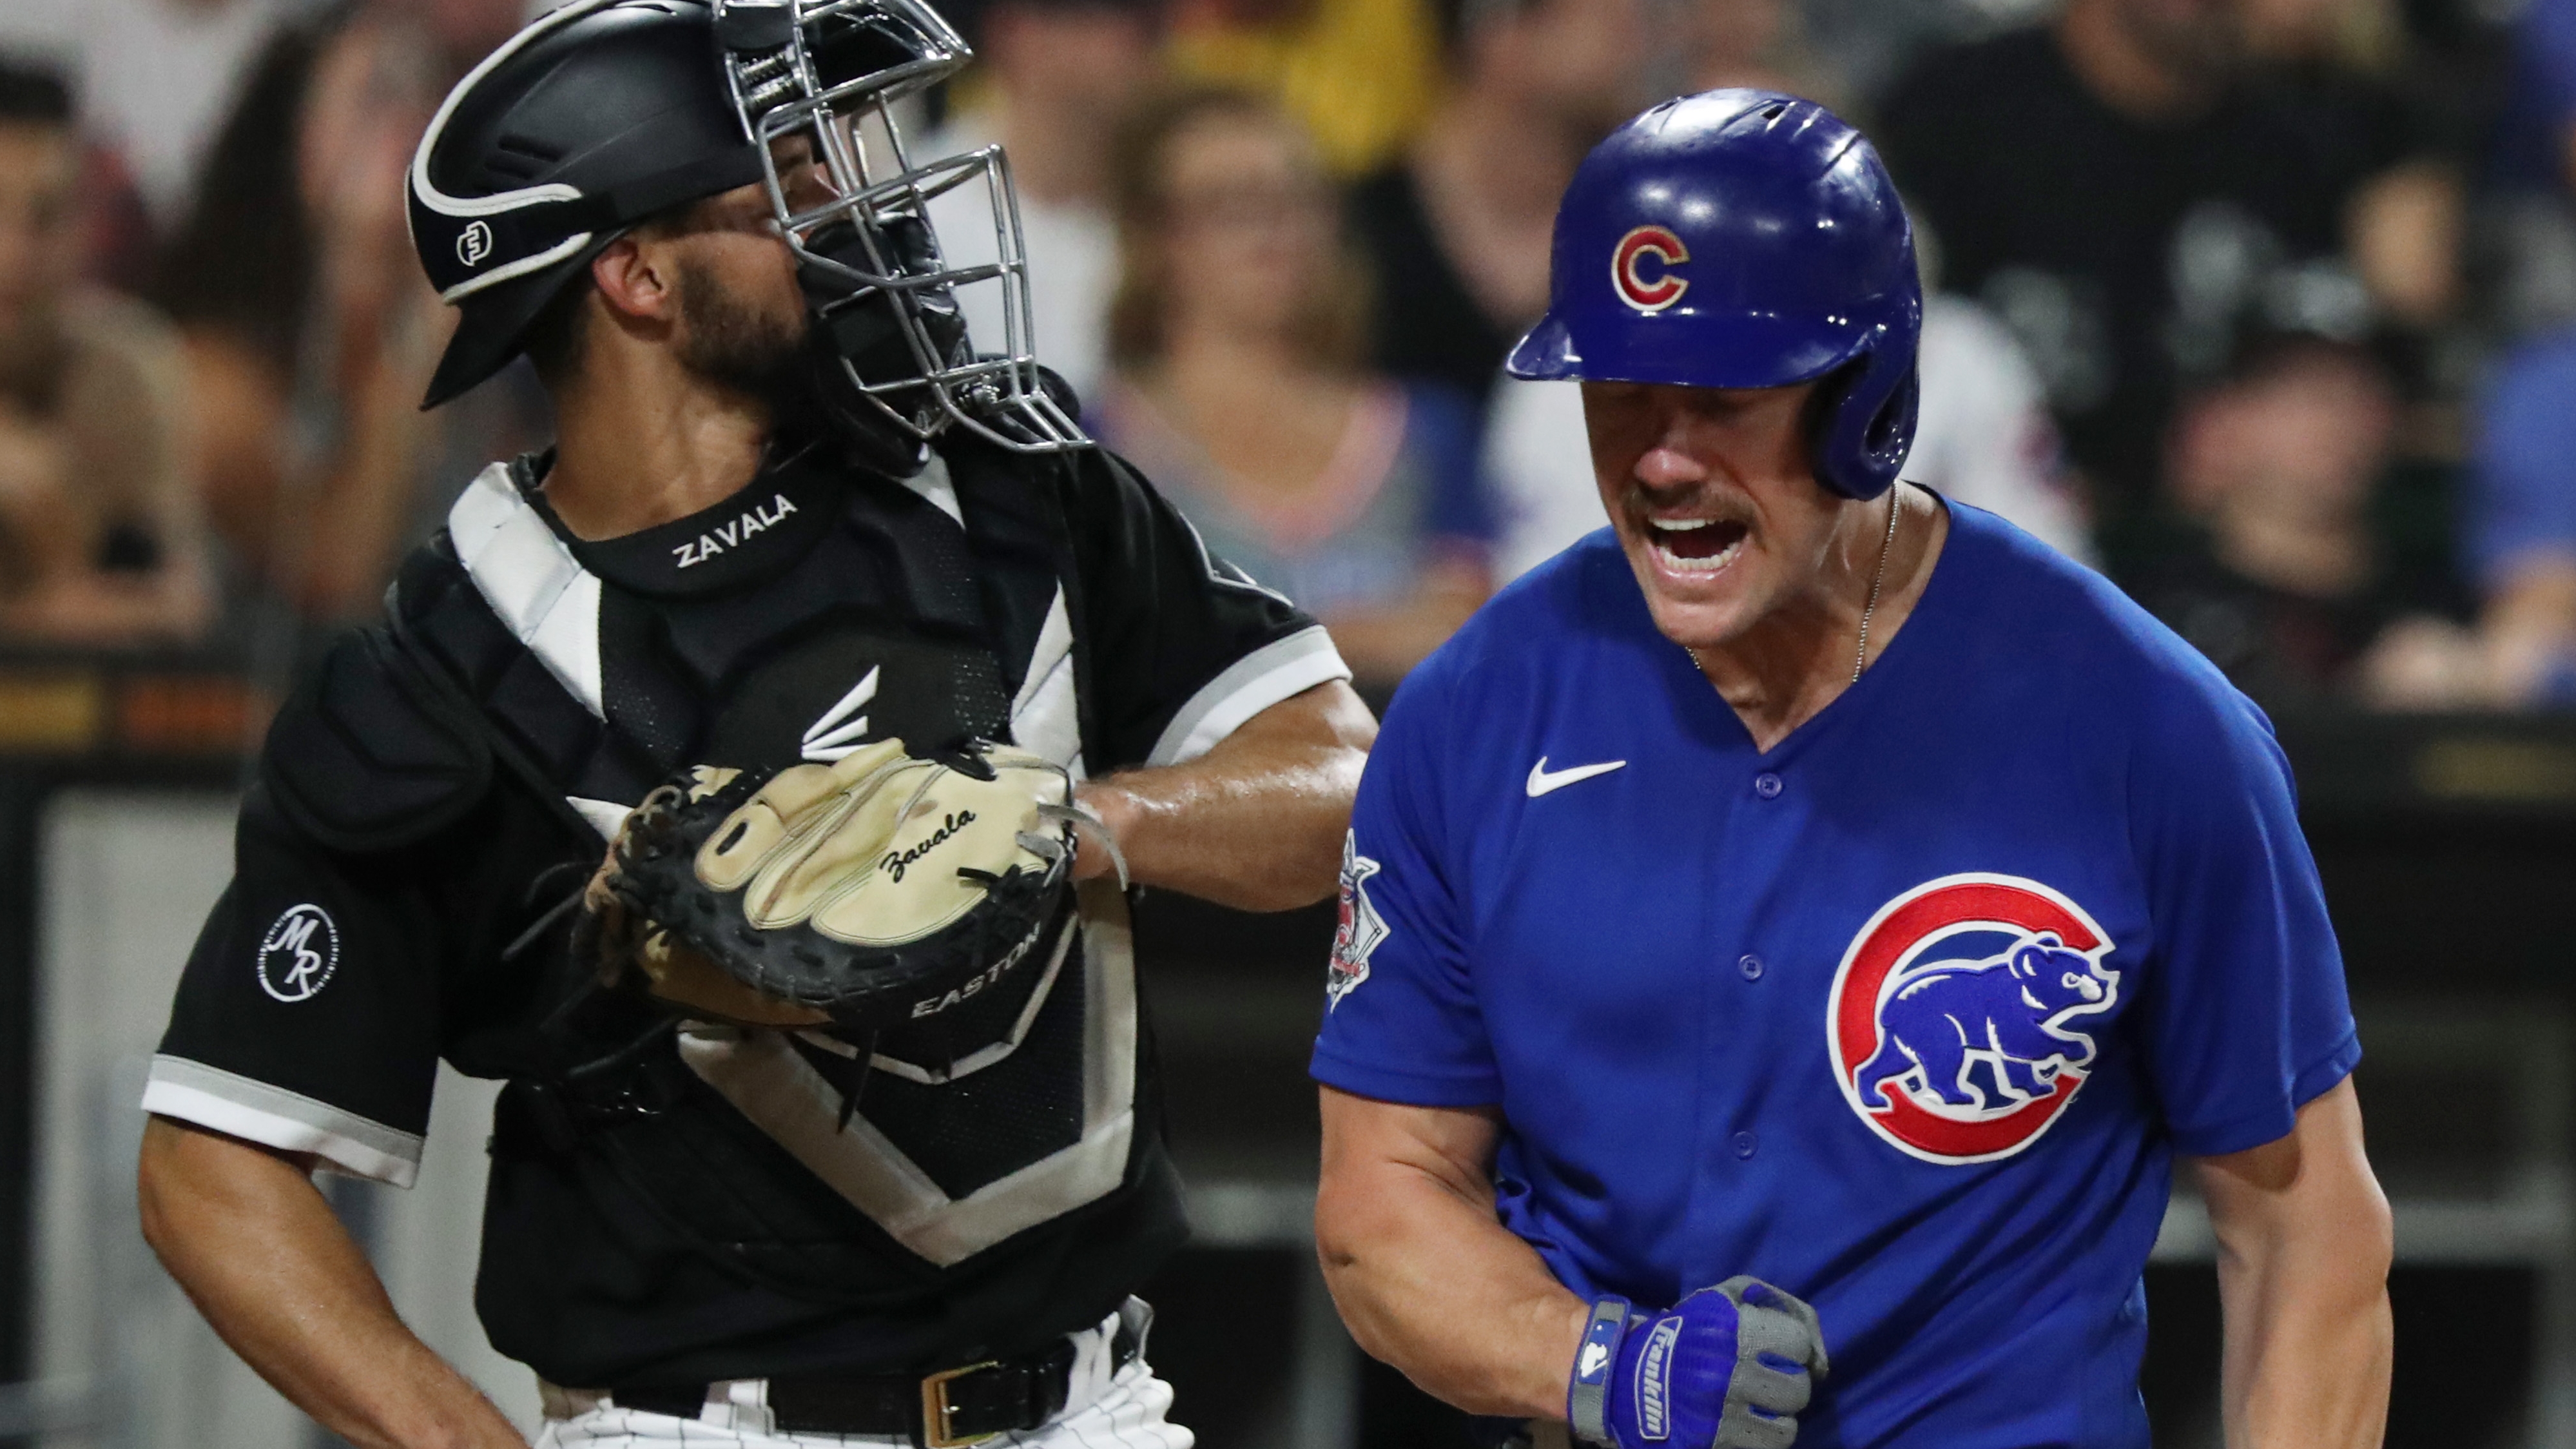 Cubs vs. White Sox at Mesa and Glendale split squad preview